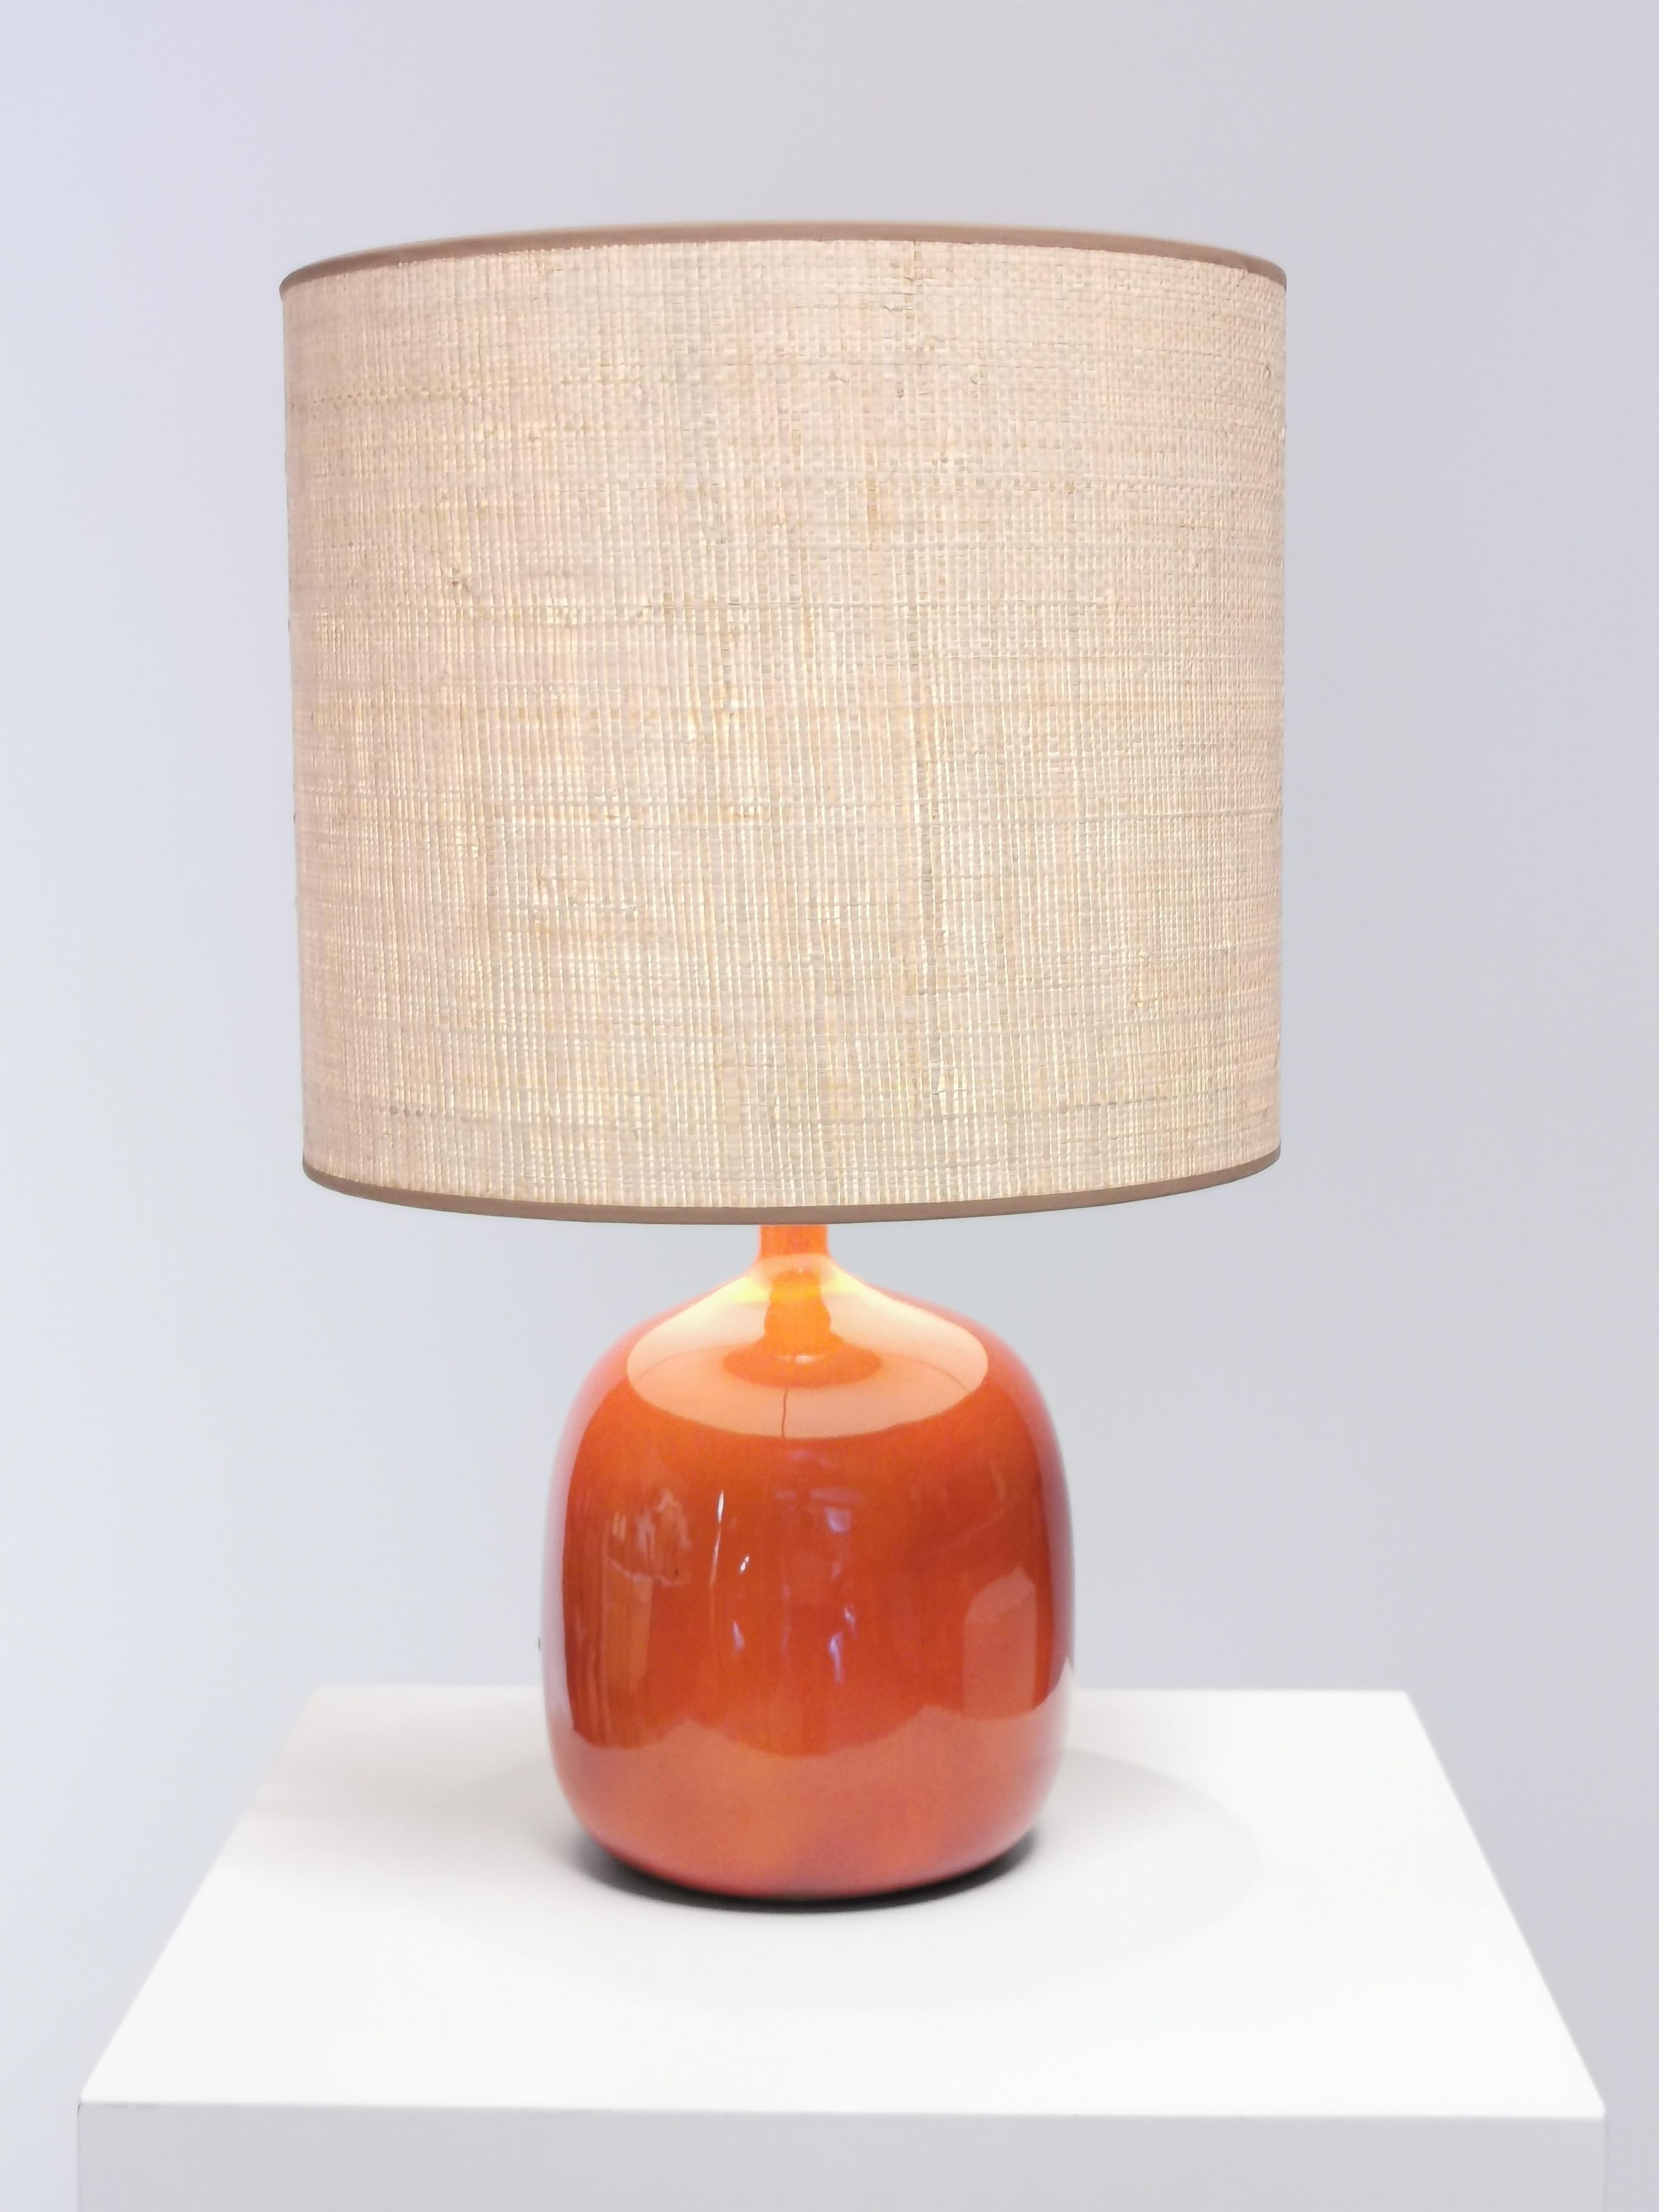 Jacques & Dani Ruelland, orange glazed ceramic lamp and raffia shade.
Executed in their workshop. Underside incised with artist´s signature 